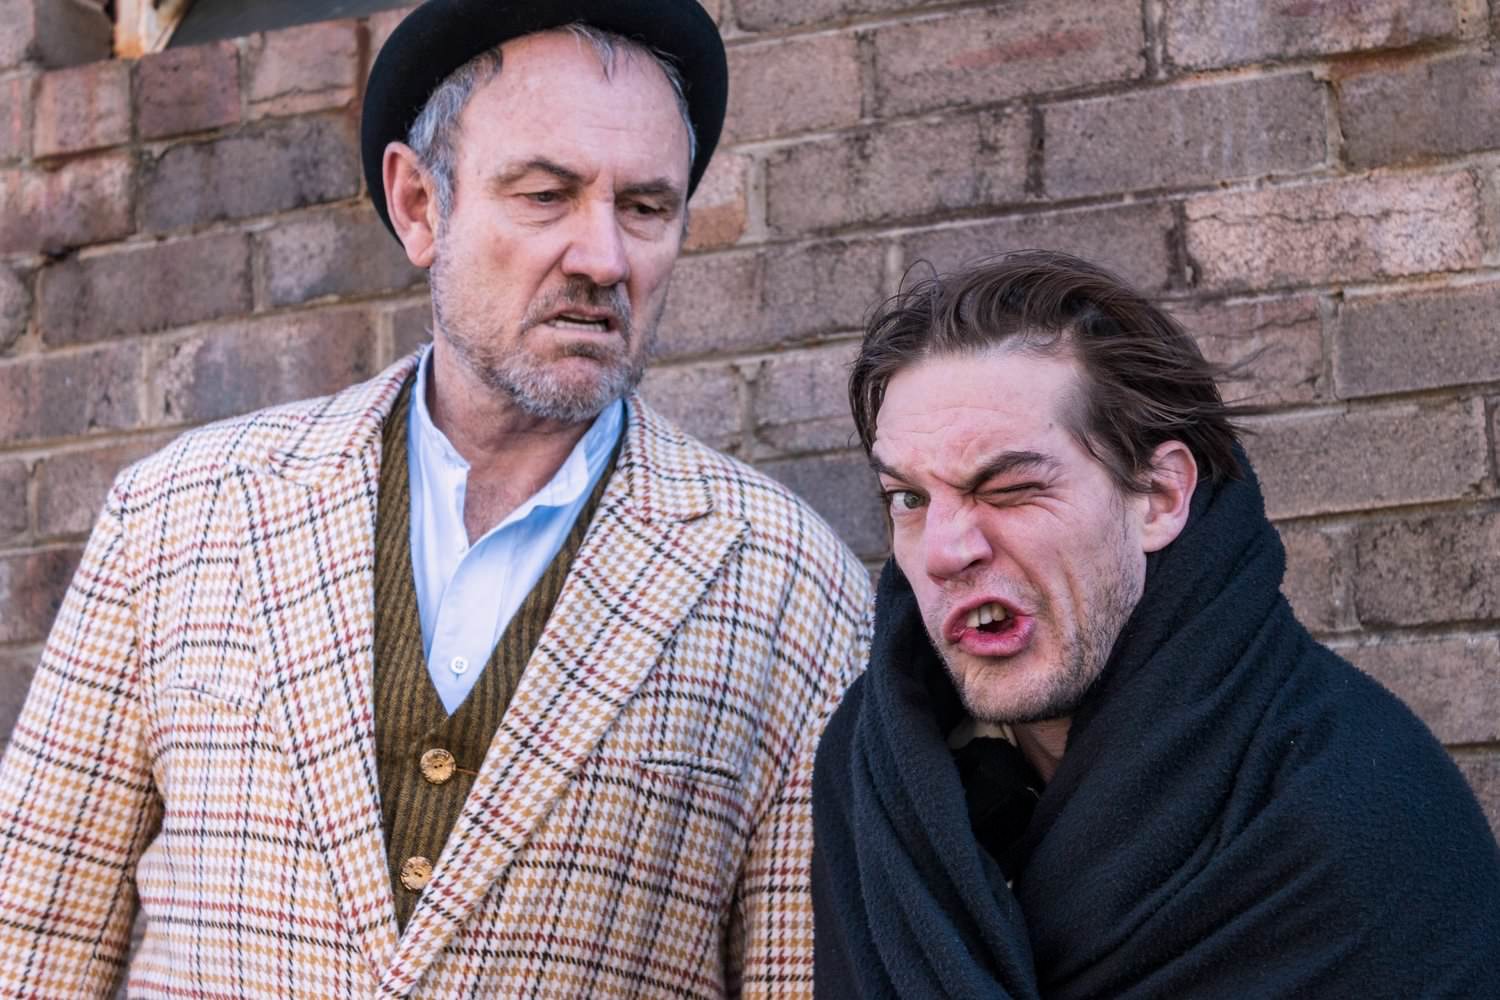 William Jordan (Left) as Ross (Merrick's nasty manager) who steals from Merrick and
sends him back to London. Harley Connor (Right) plays John Merrick. Photo by Emma Wright.